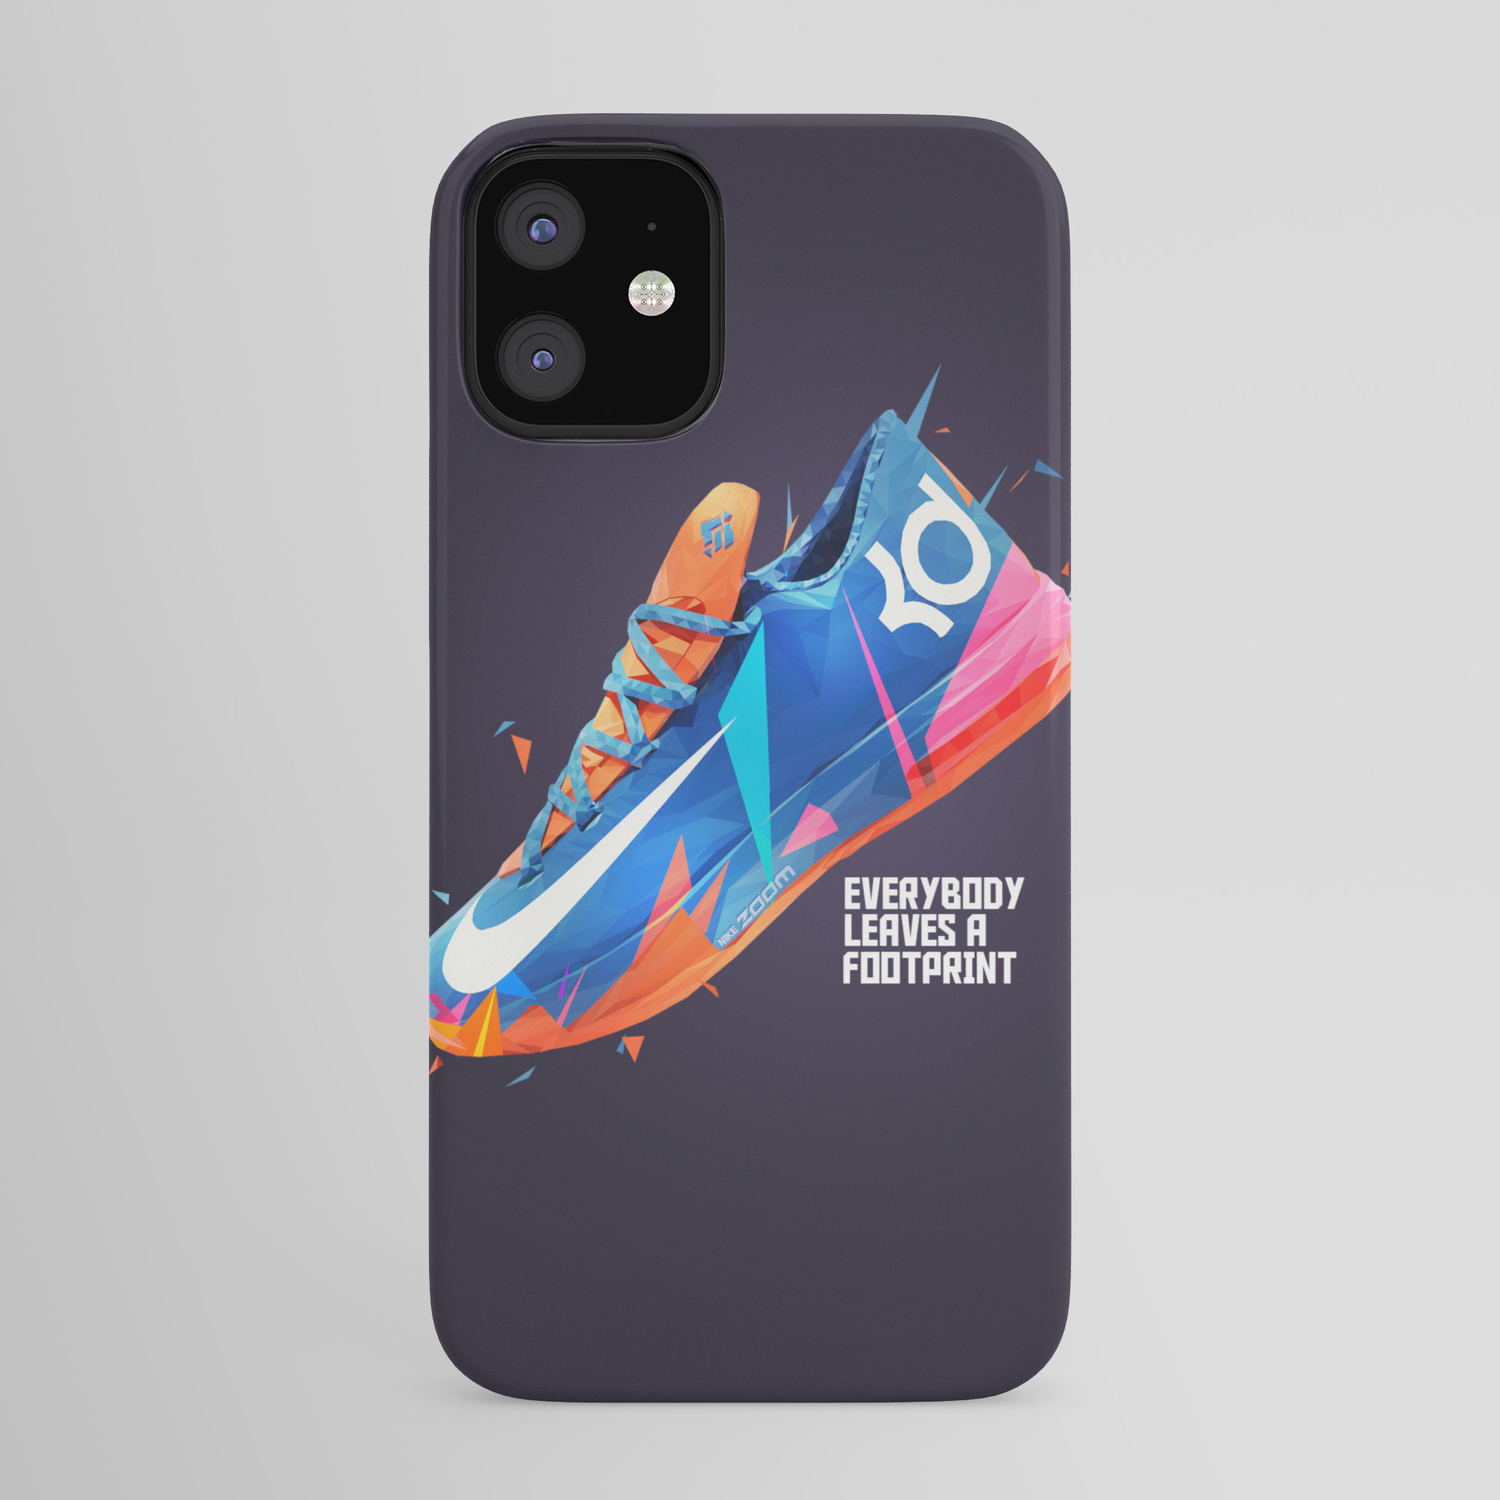 NIKE ZOOM iPhone Case by Ian Quijano |